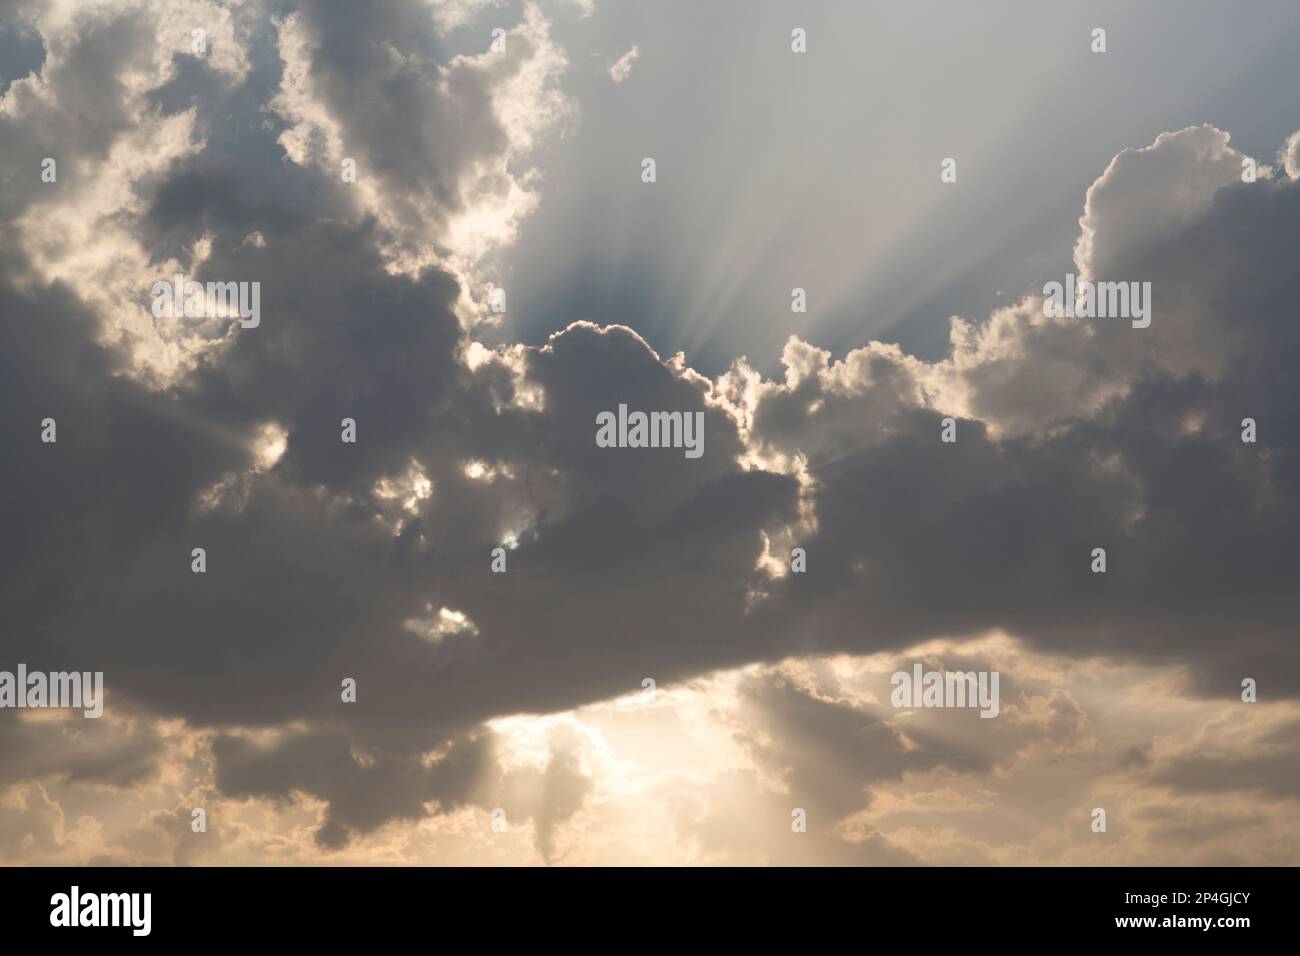 Cyprus, crepuscular rays creating dramatic looking clouds near Pathos. Stock Photo